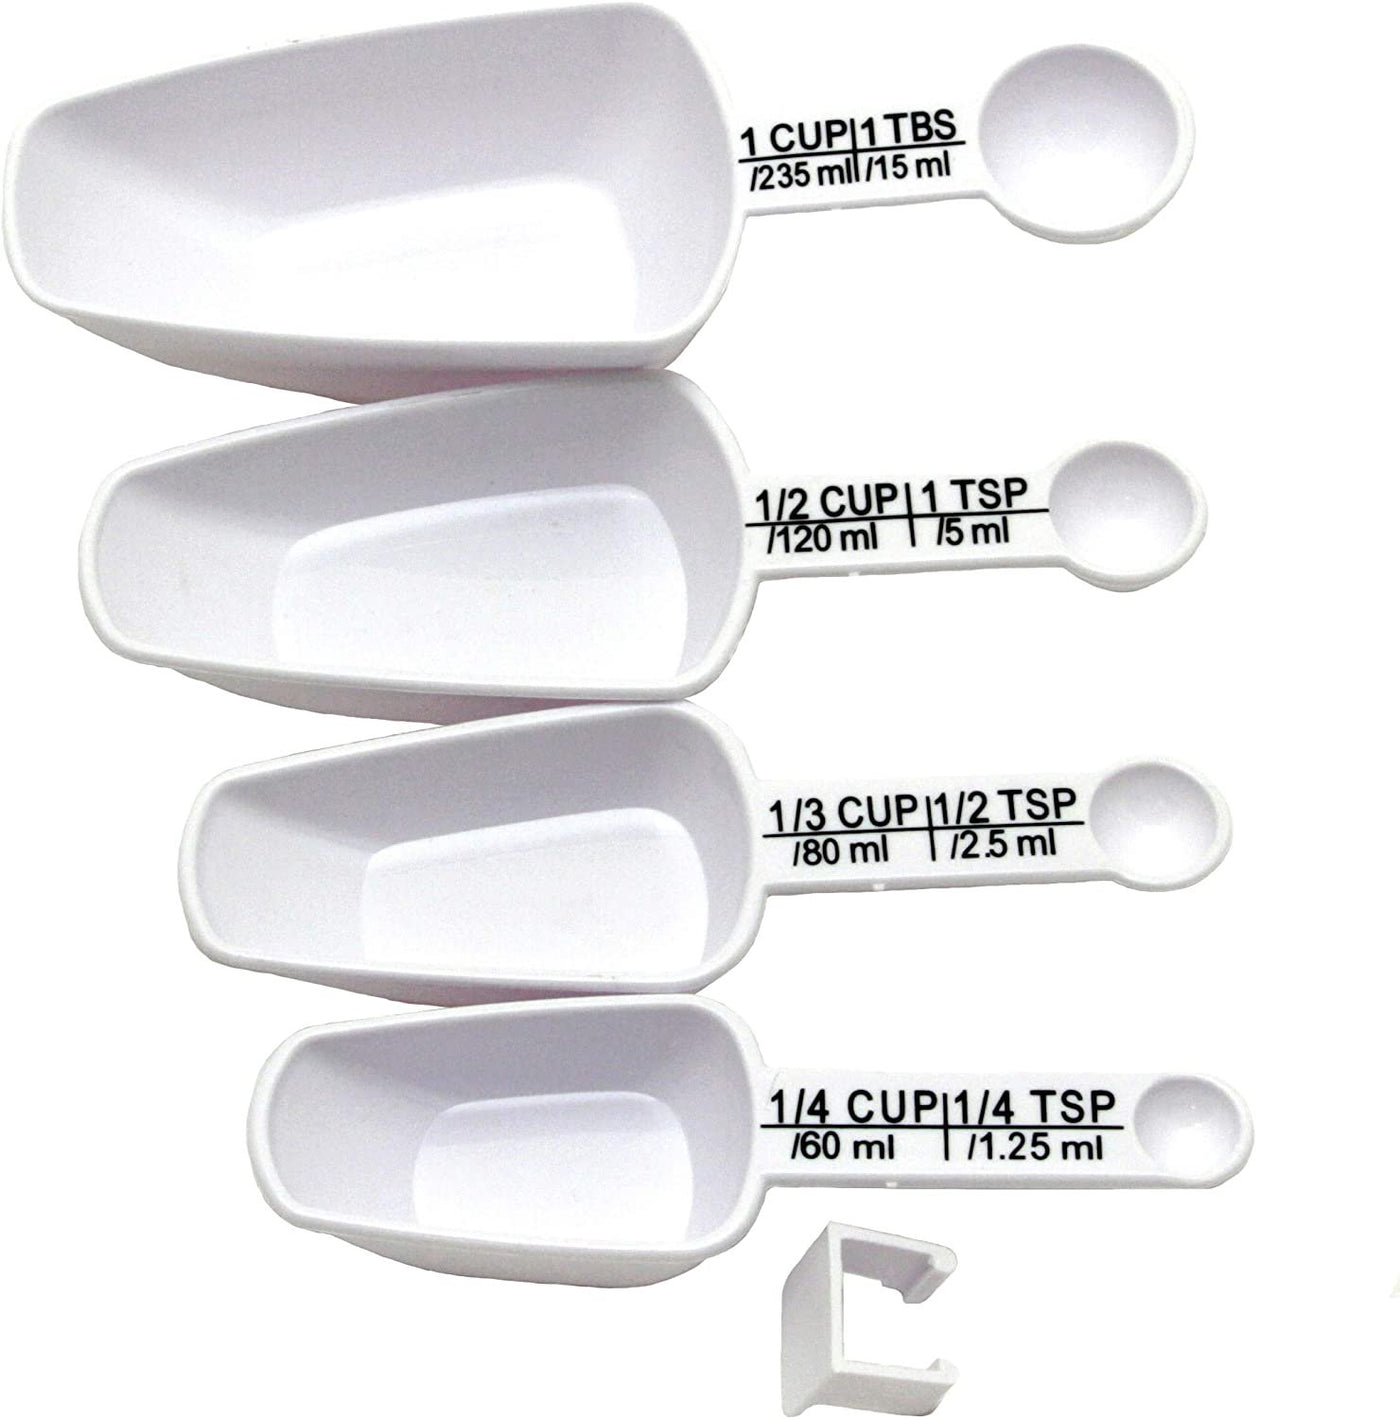 Kitchen Craft Set of 10 Stacking Measuring Cups - Tsp, Tbsp, Cups, Spoons